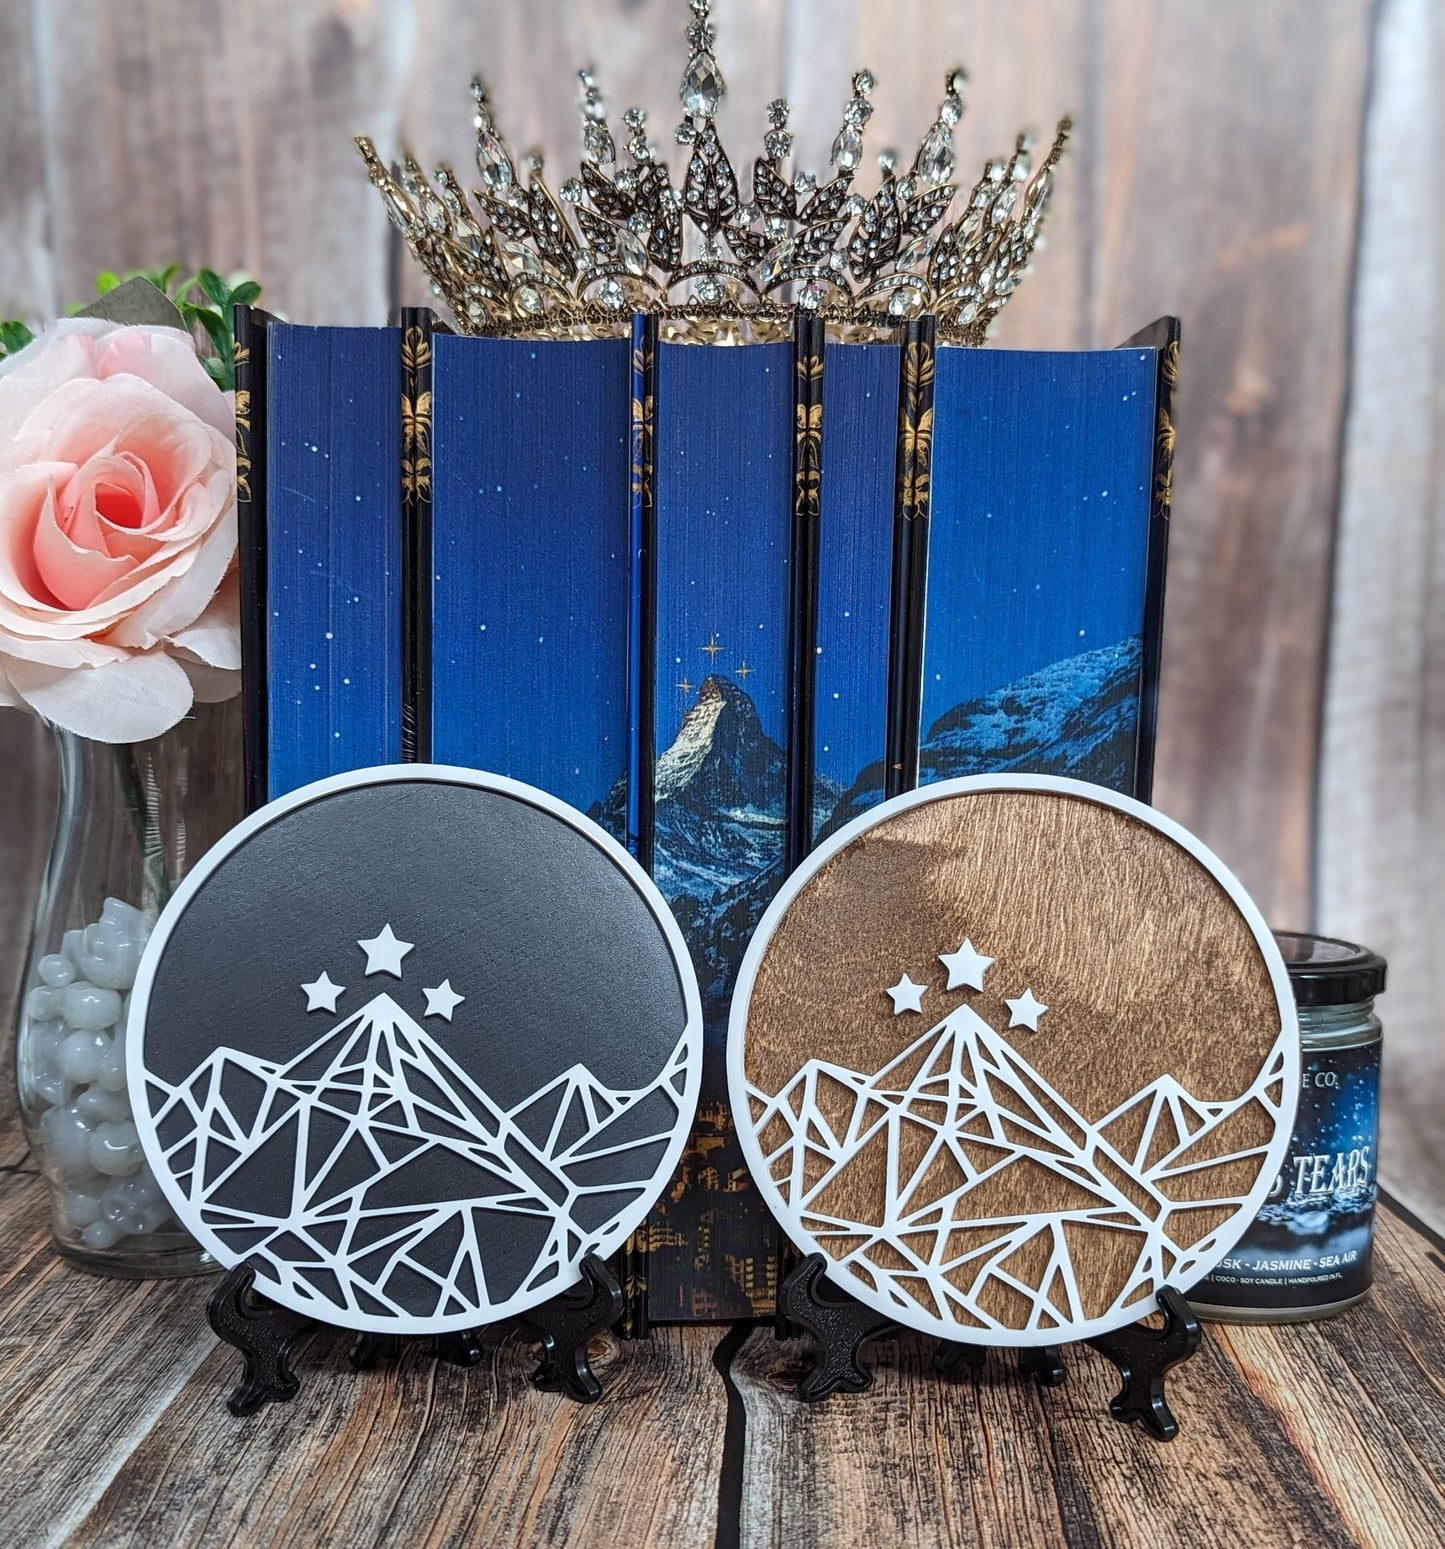 City of Starlight Night Court Insignia, A Court of Thorns and Roses, Officially Licensed Sarah J Maas Bookshelf Sign - Shelf Sitter - Quill & Cauldron